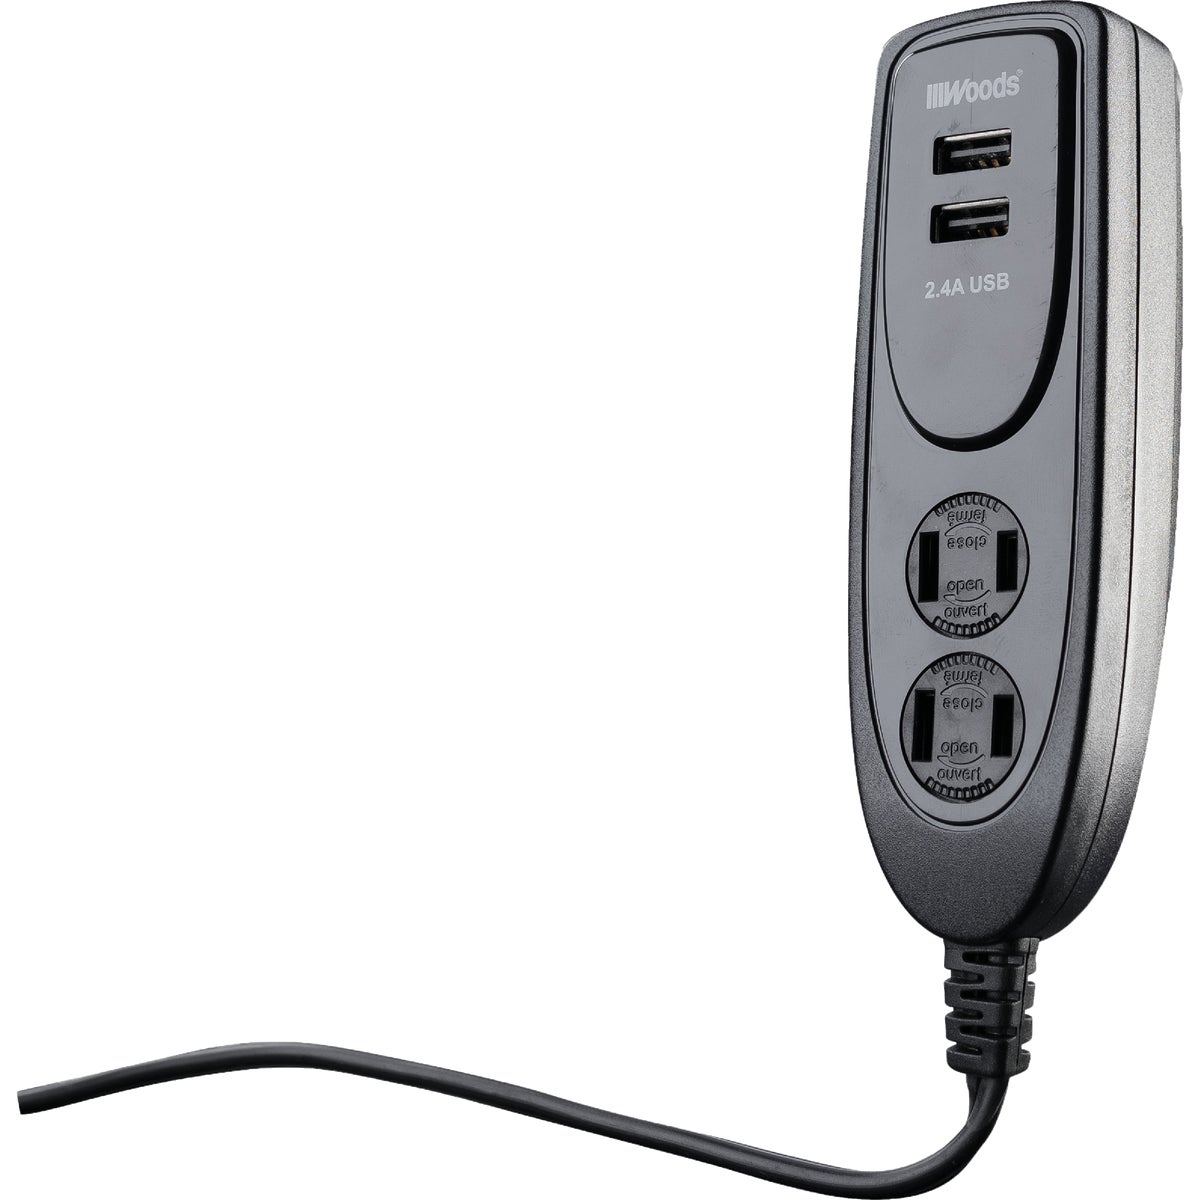 Item 502723, 2-USB (universal serial bus) port charger with 2 standard outlet power 